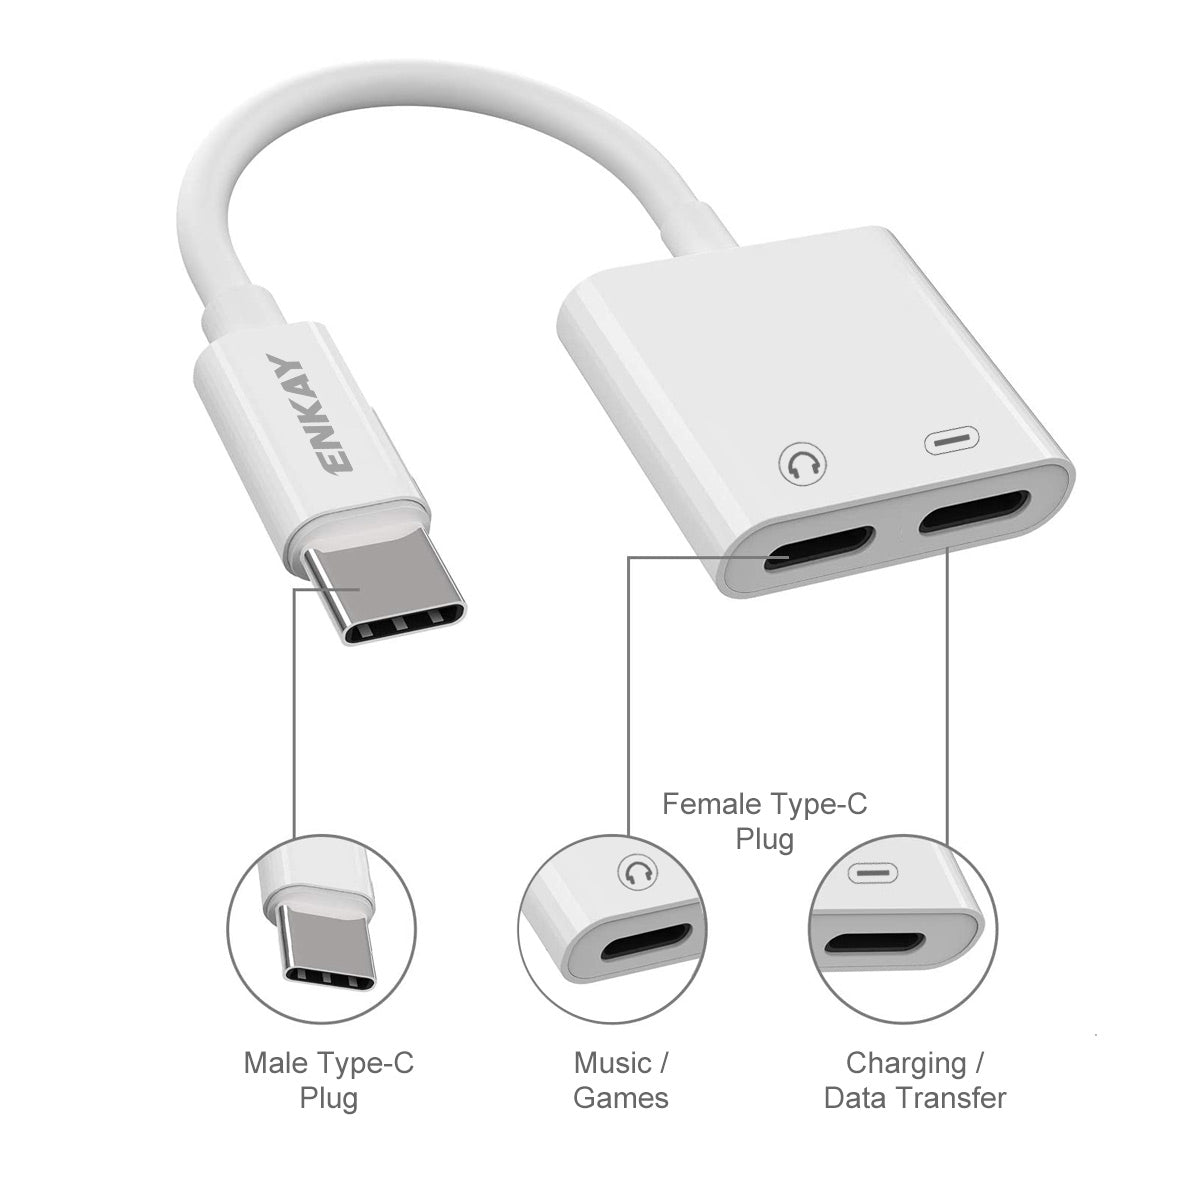 ENK-AT105 Dual USB Type C Splitter 2 in 1 Audio Converter Type C to Type C Male to Female Adapter